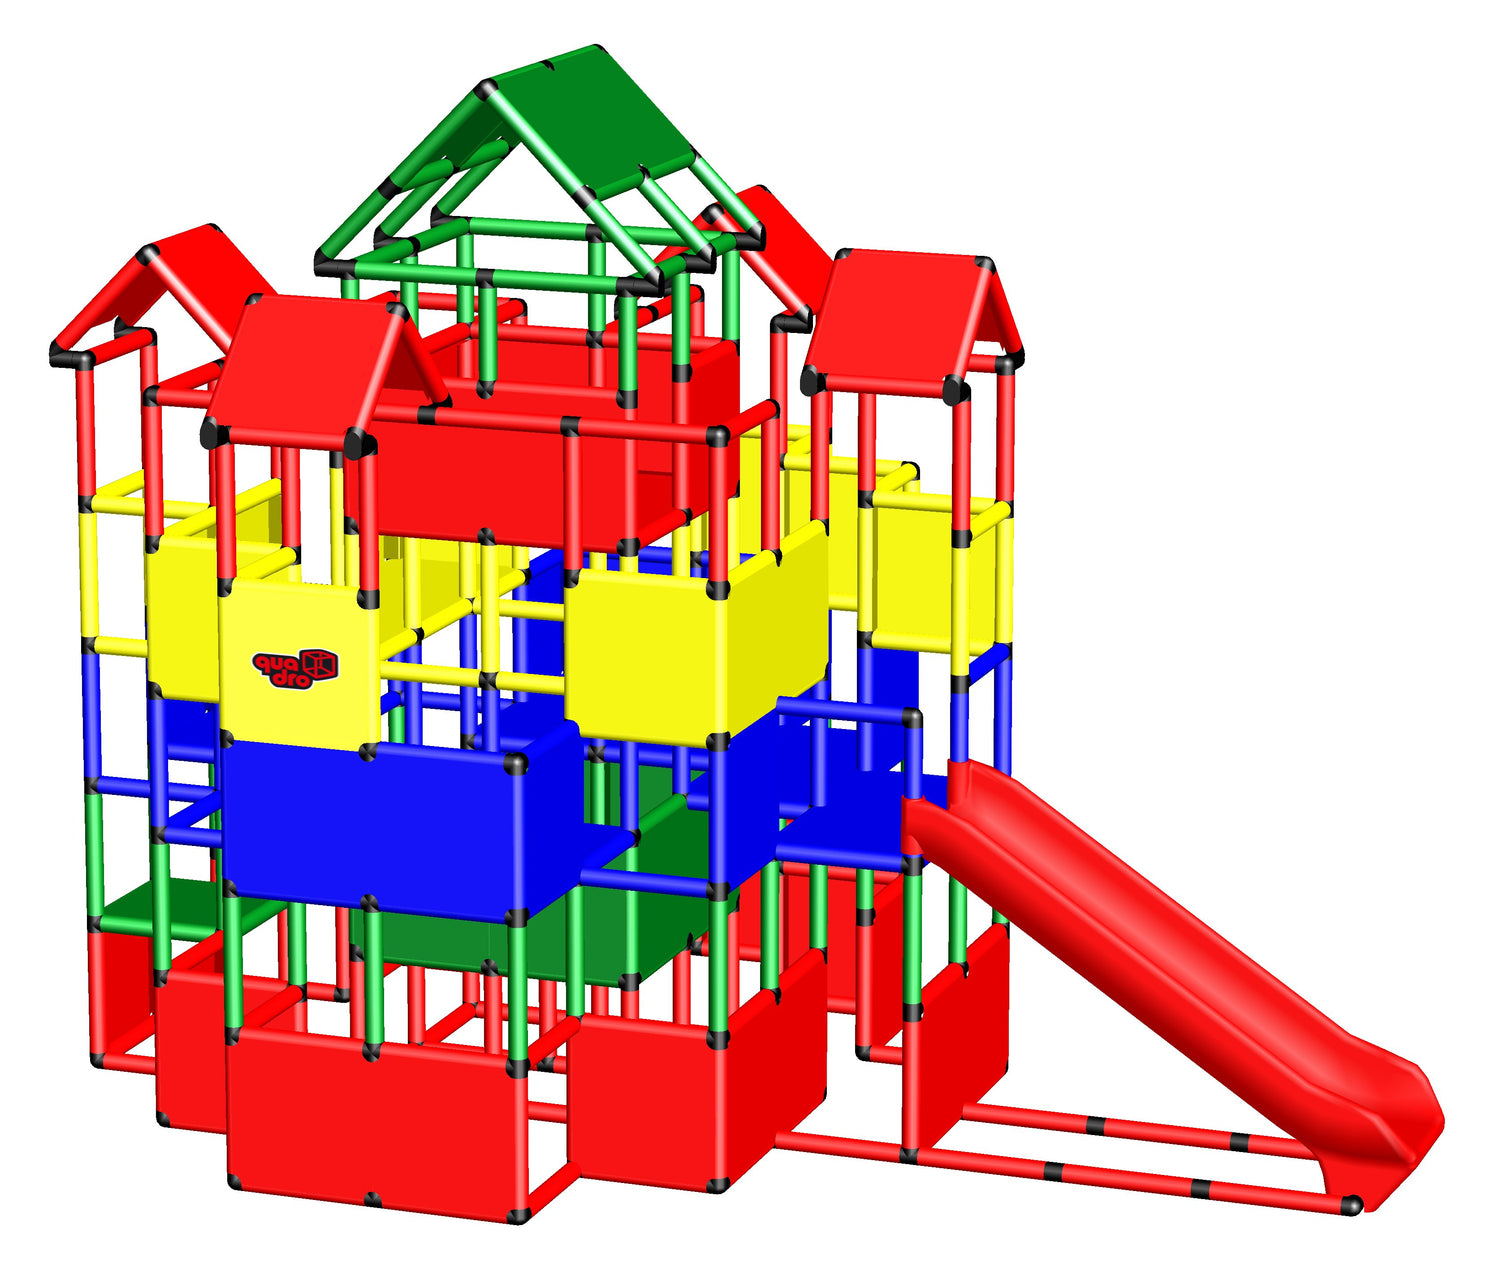 Castle 3 with Integrated Slide